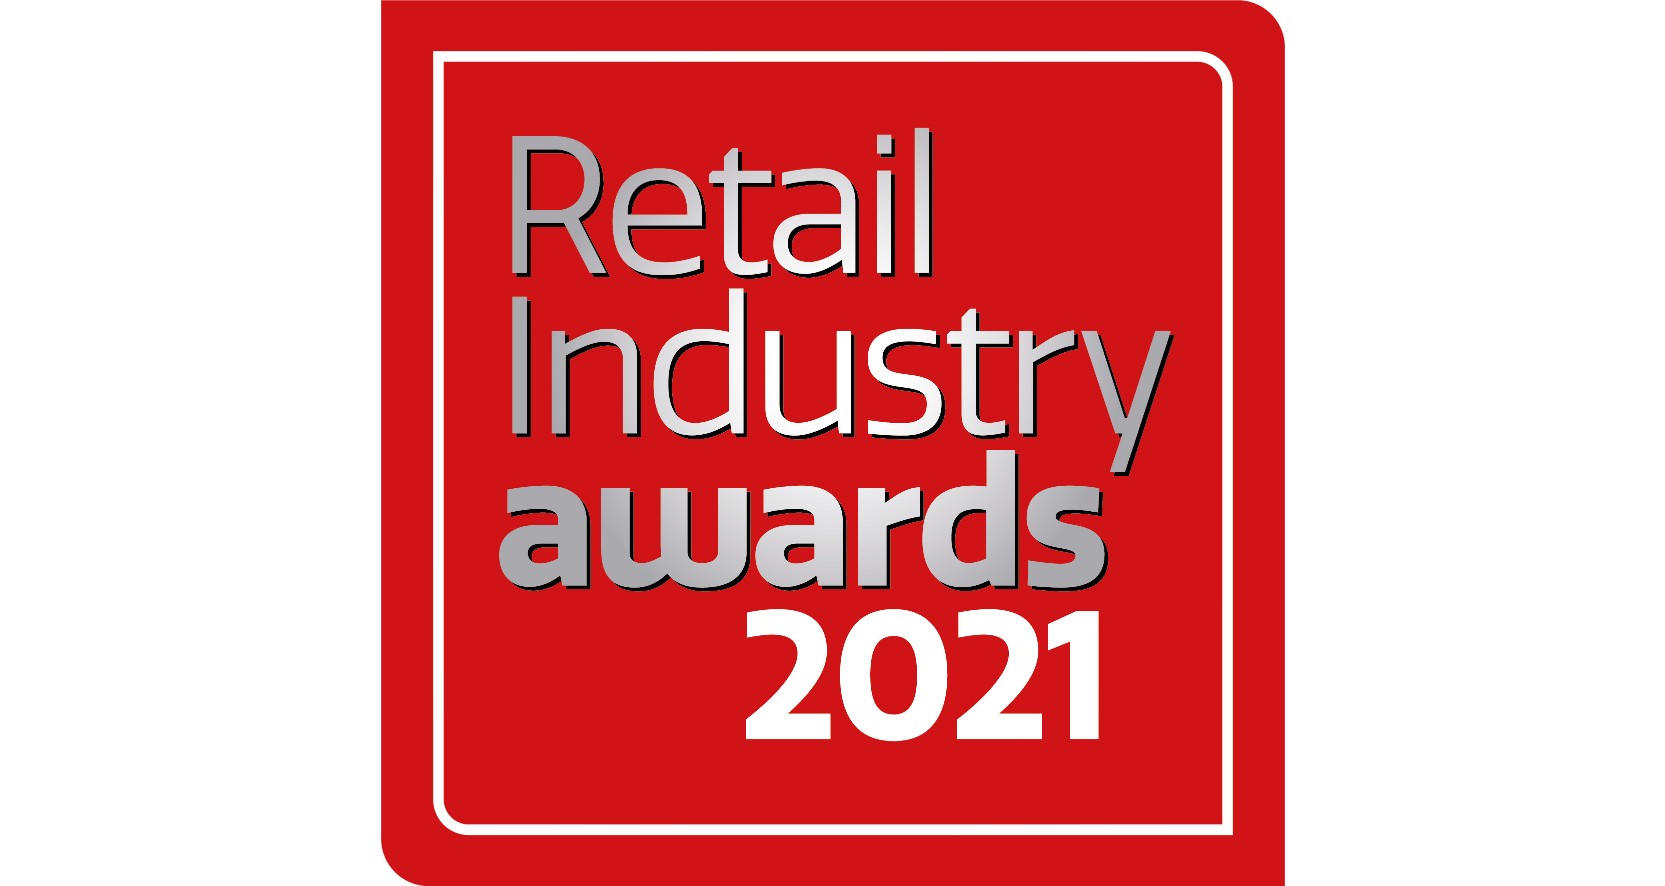 Retail Industry Awards 2021 multiples shortlist unveiled